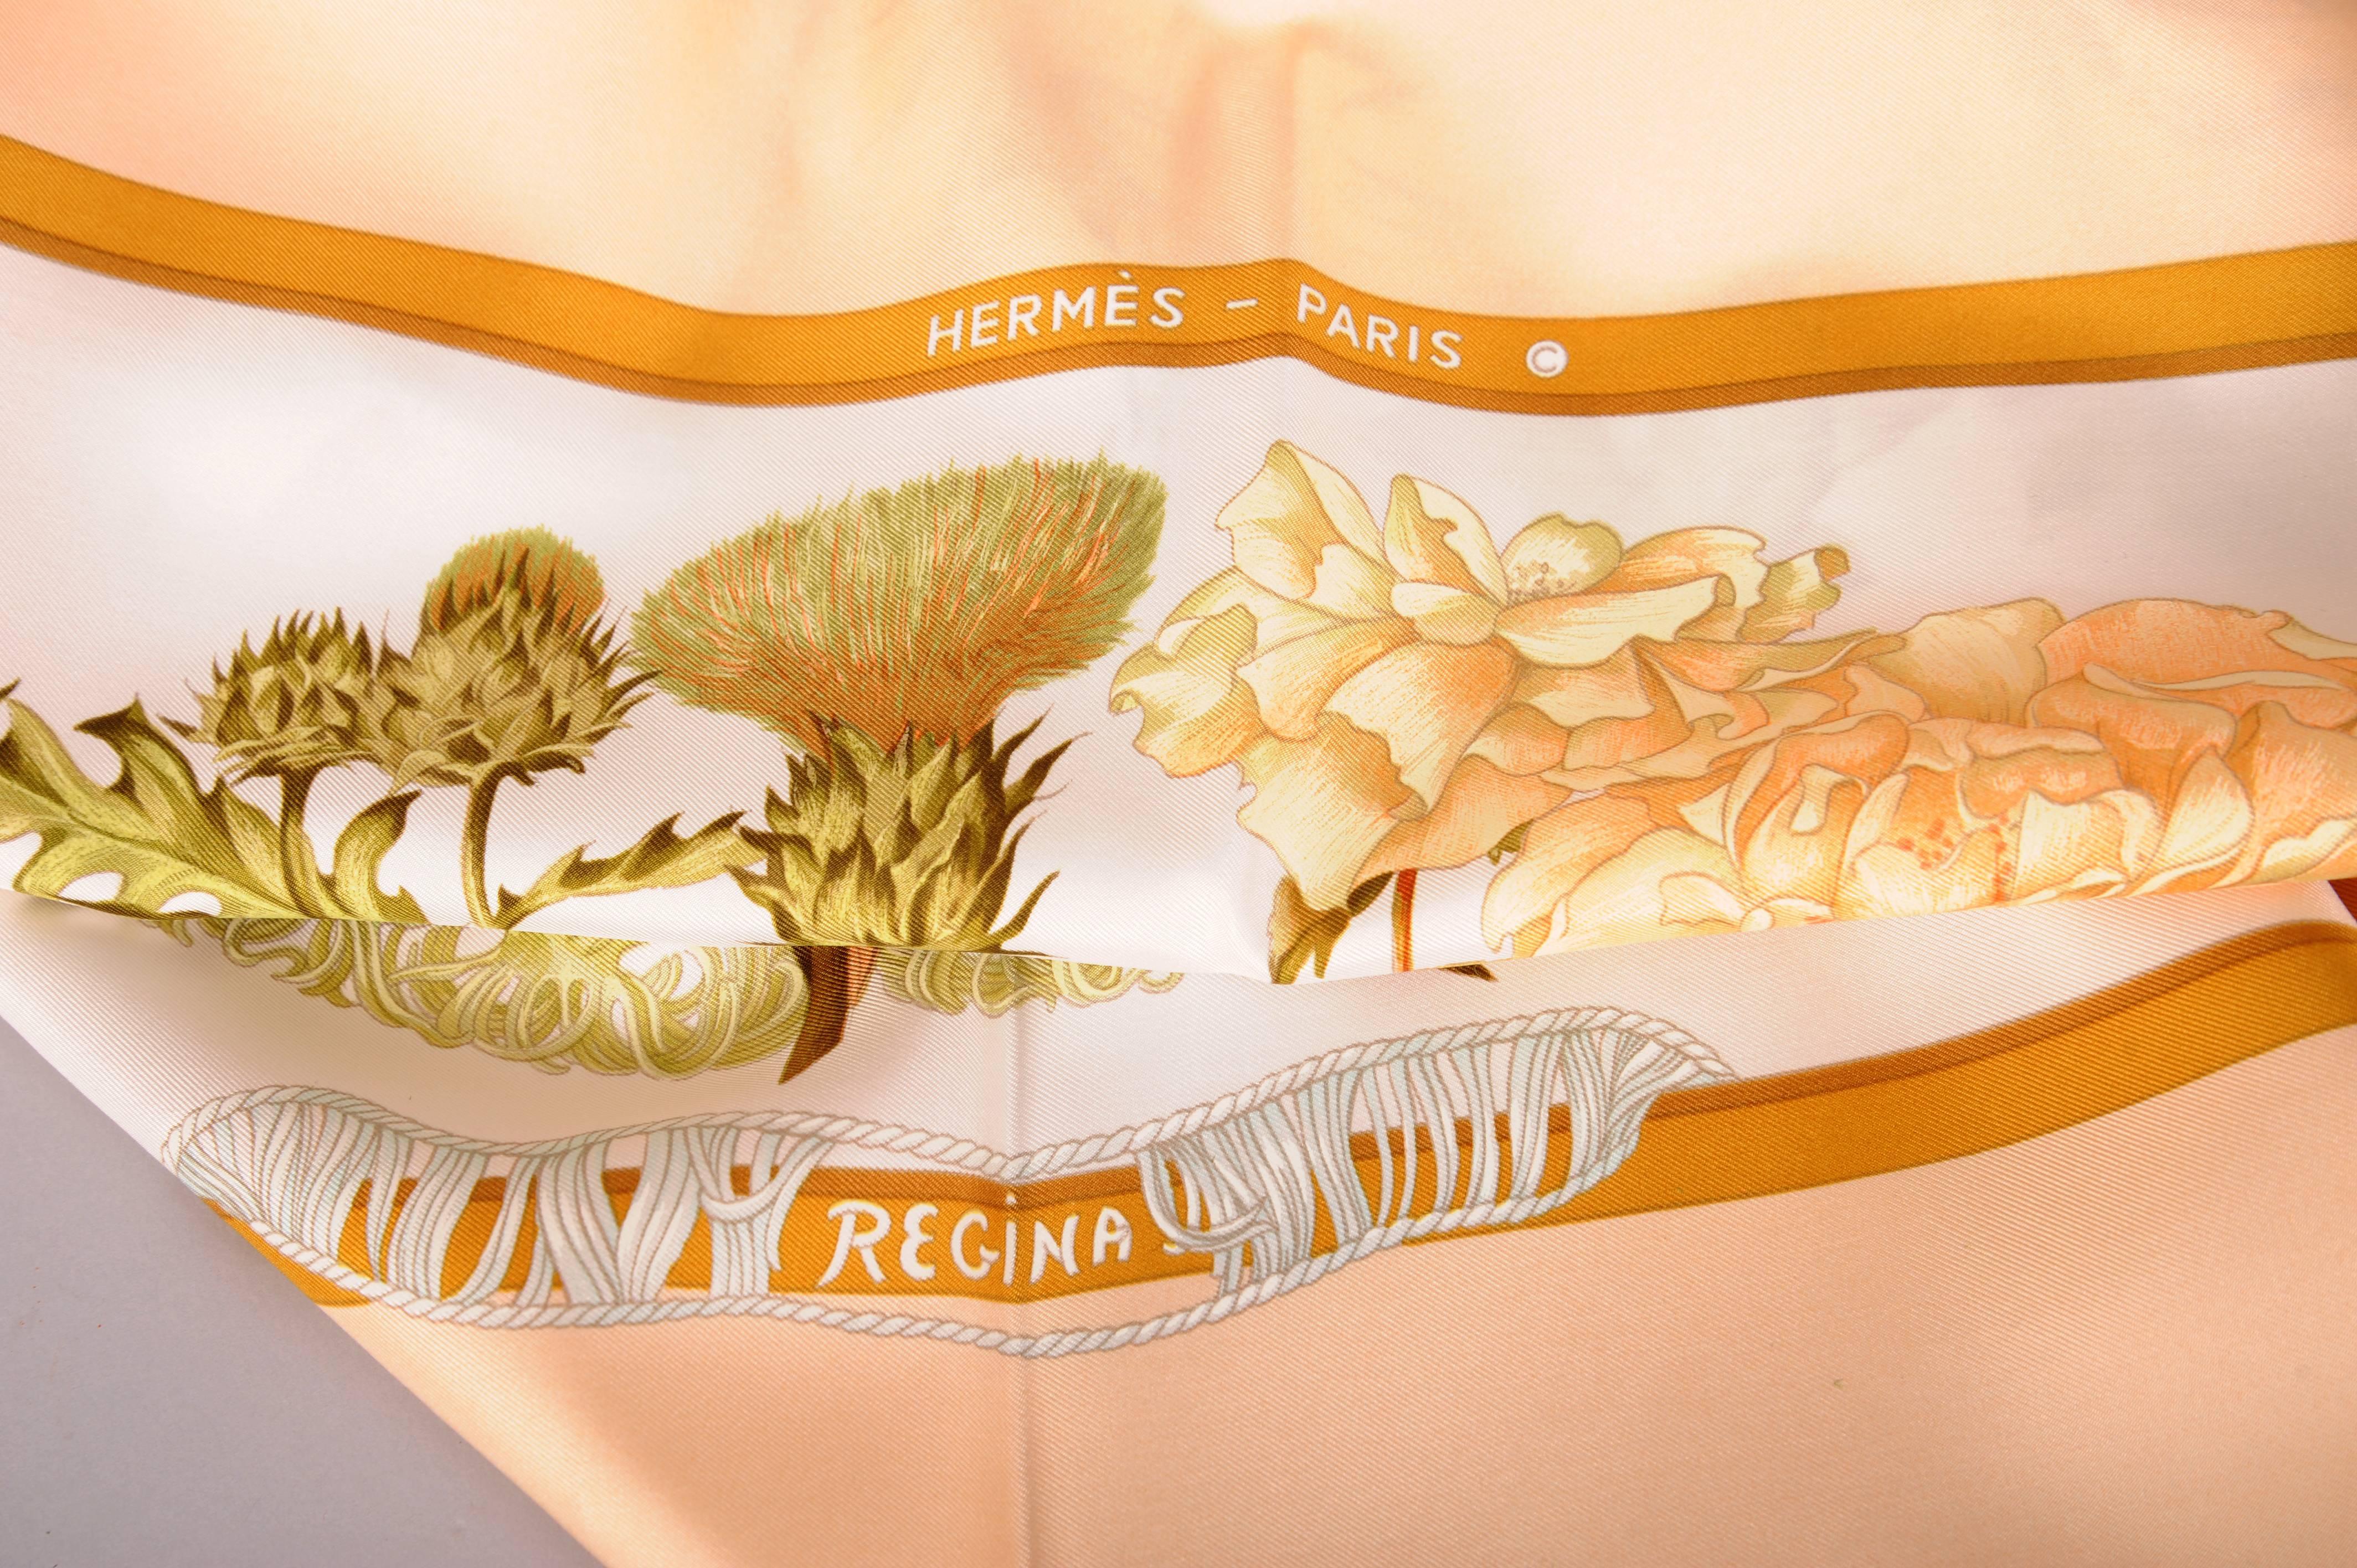 Leila Menchari, the Artistic Director of Hermes, is responsible fr many of their truly amazing window displays. She designed this scarf in shades of peach, coral and green. It is in excellent condition and comes with the original box.